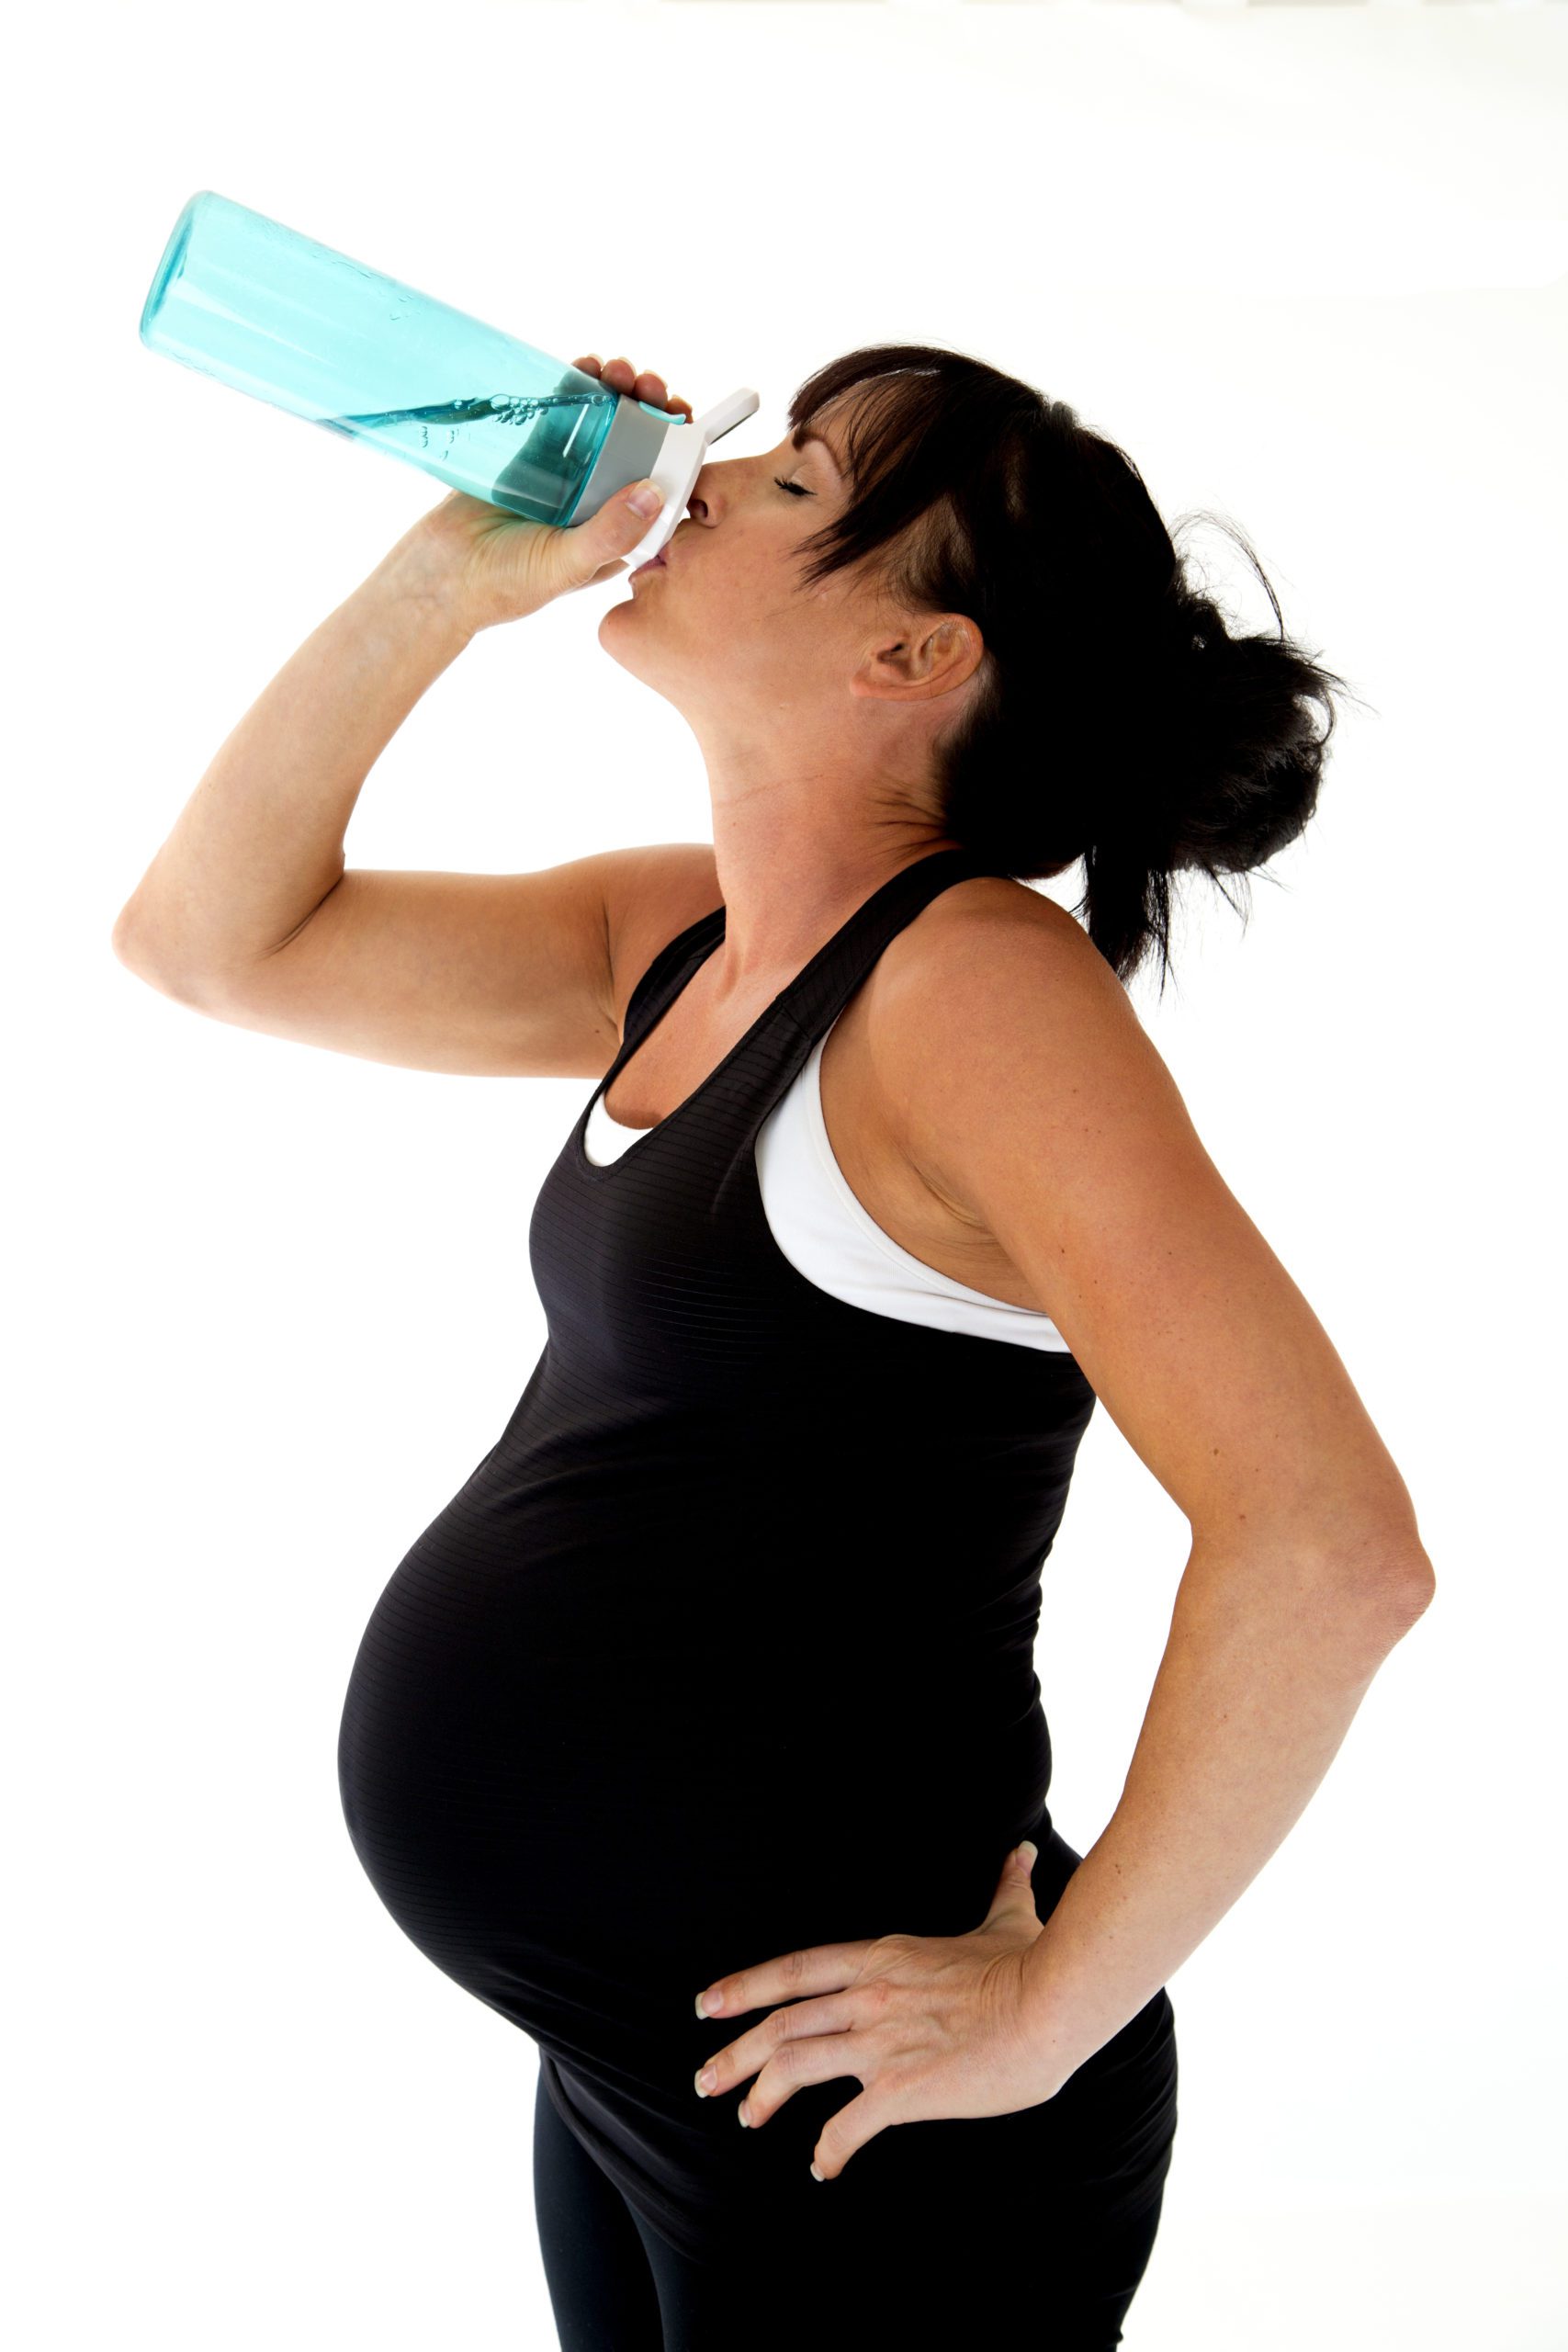 Pregnant? Here are some tips for staying hydrated in the summer heat